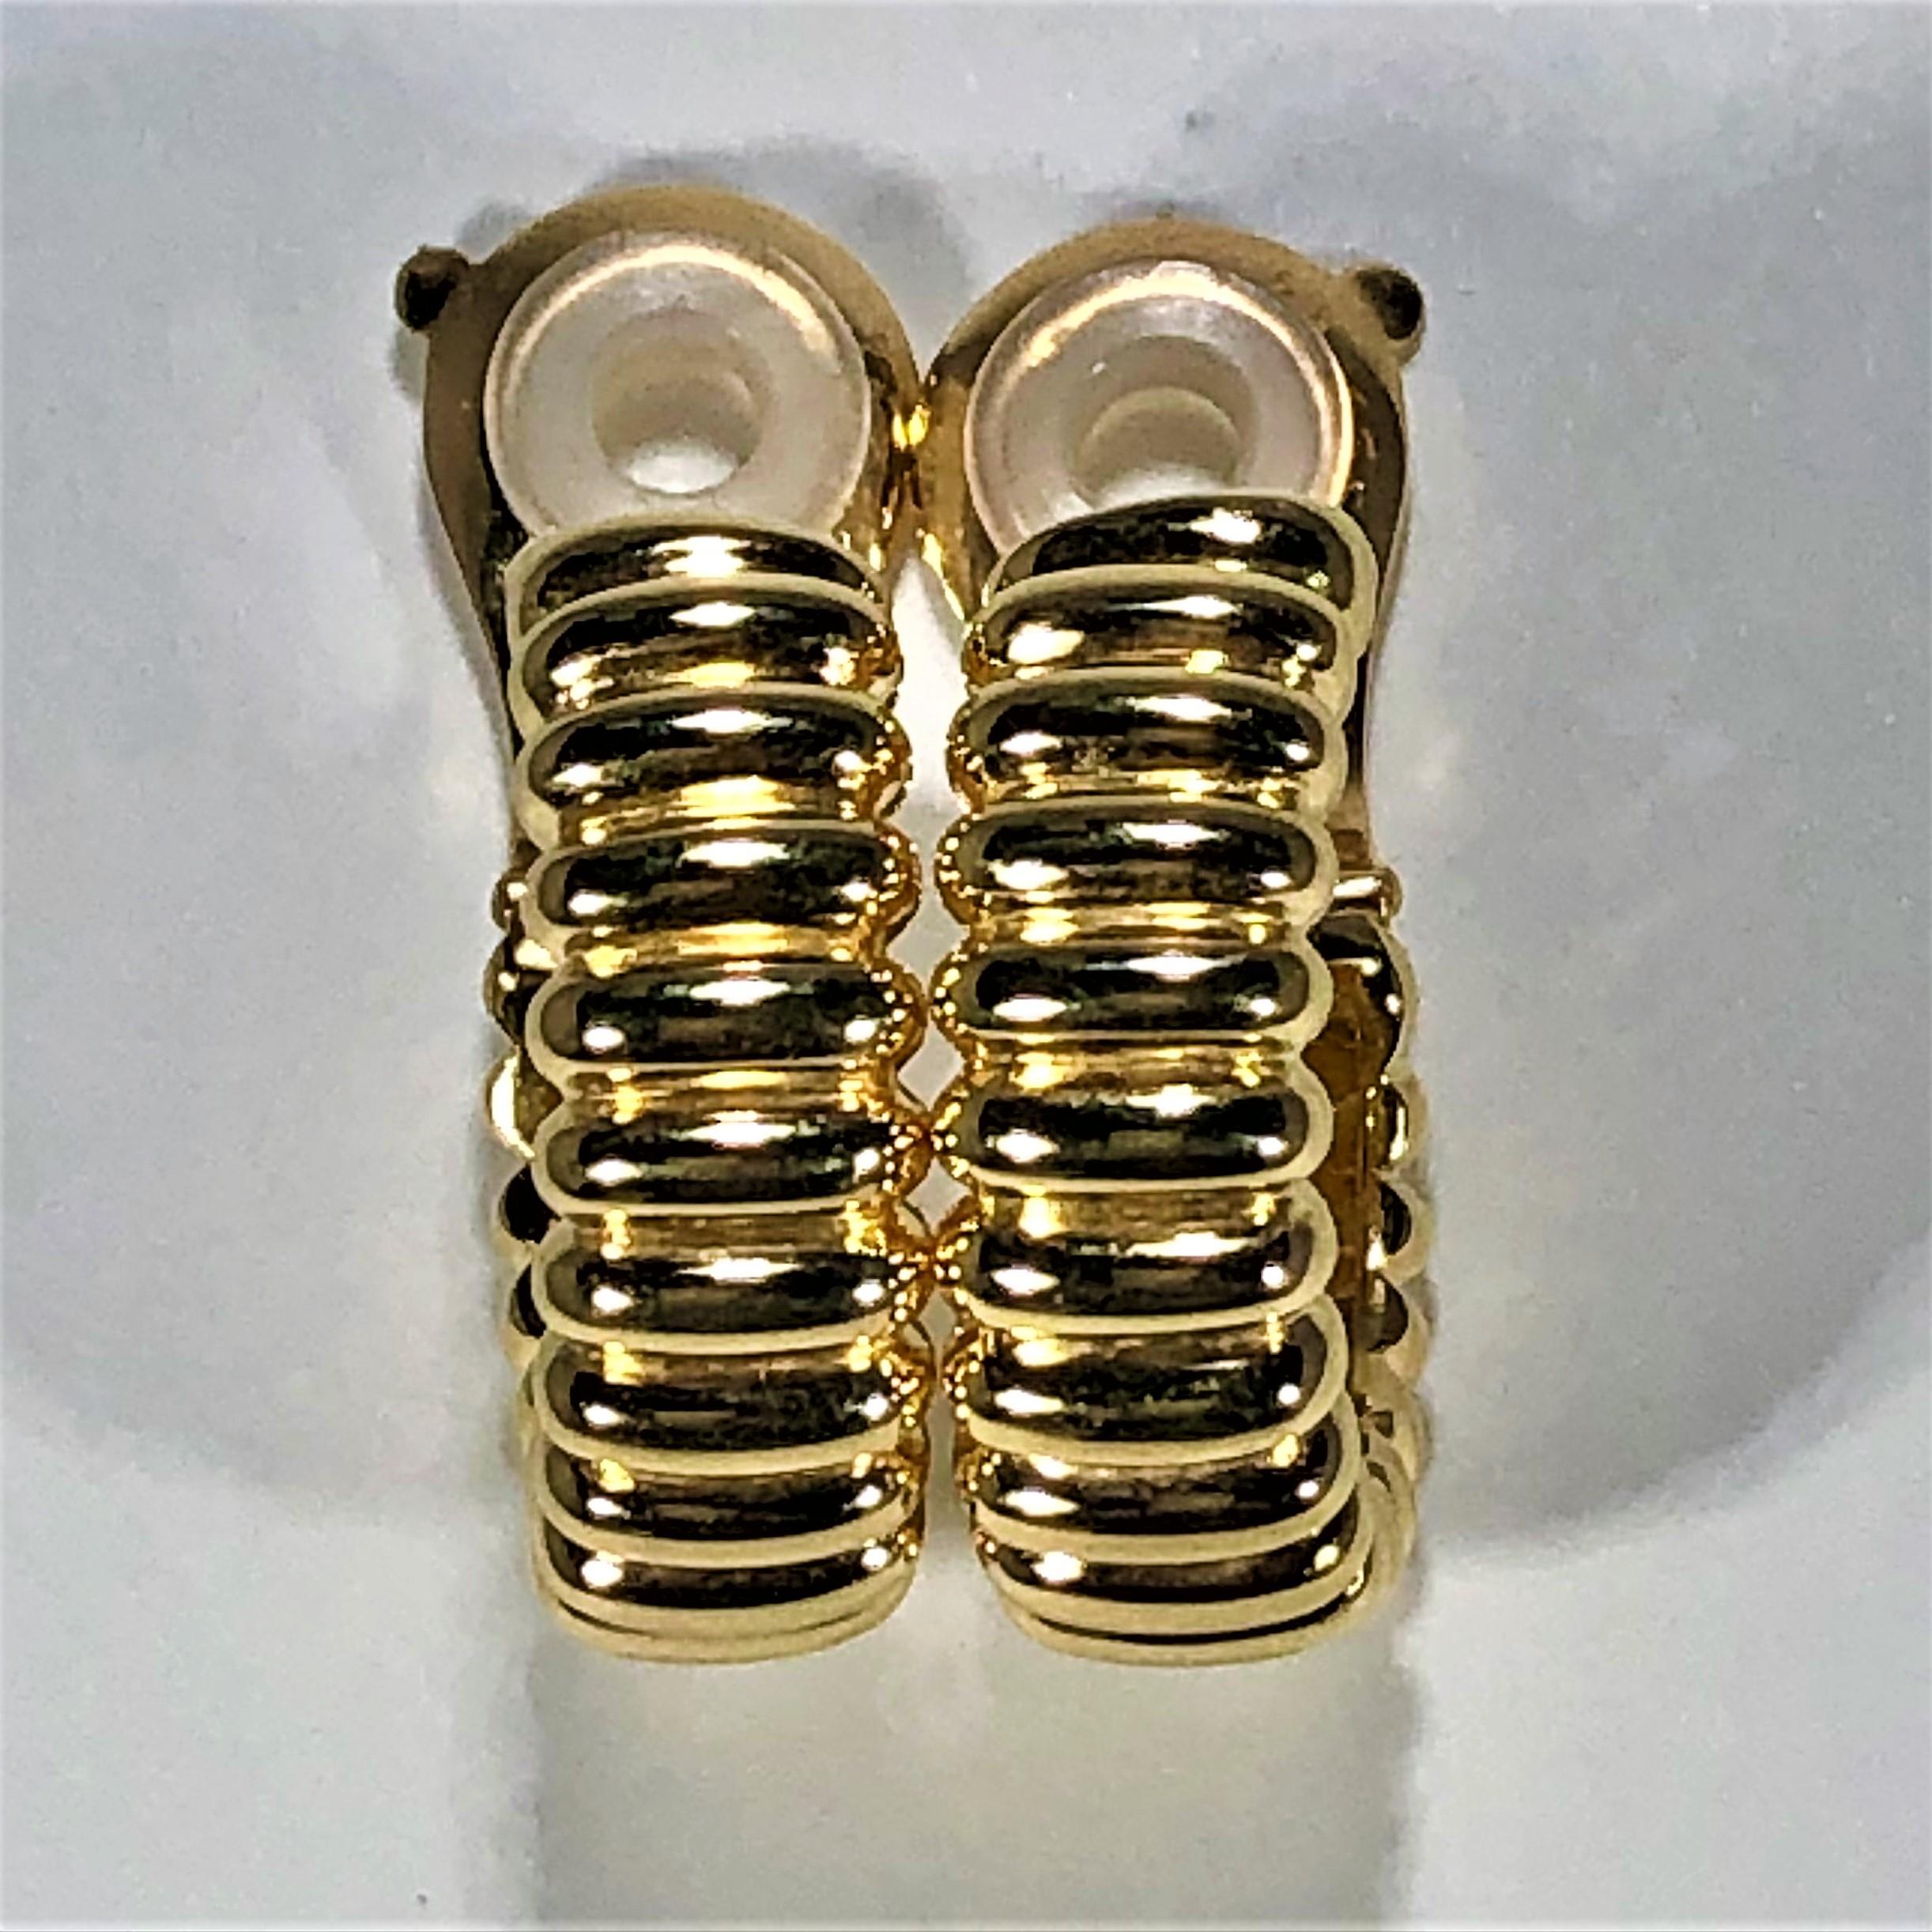 A pair of 18K yellow gold earrings that would be right at home with a tubogas collection, due to its corrugated appearance. Designed by Van Cleef & Arpels, they measure 7/8 of an inch long, and 5/16 of an inch wide, and have a beautiful high polish